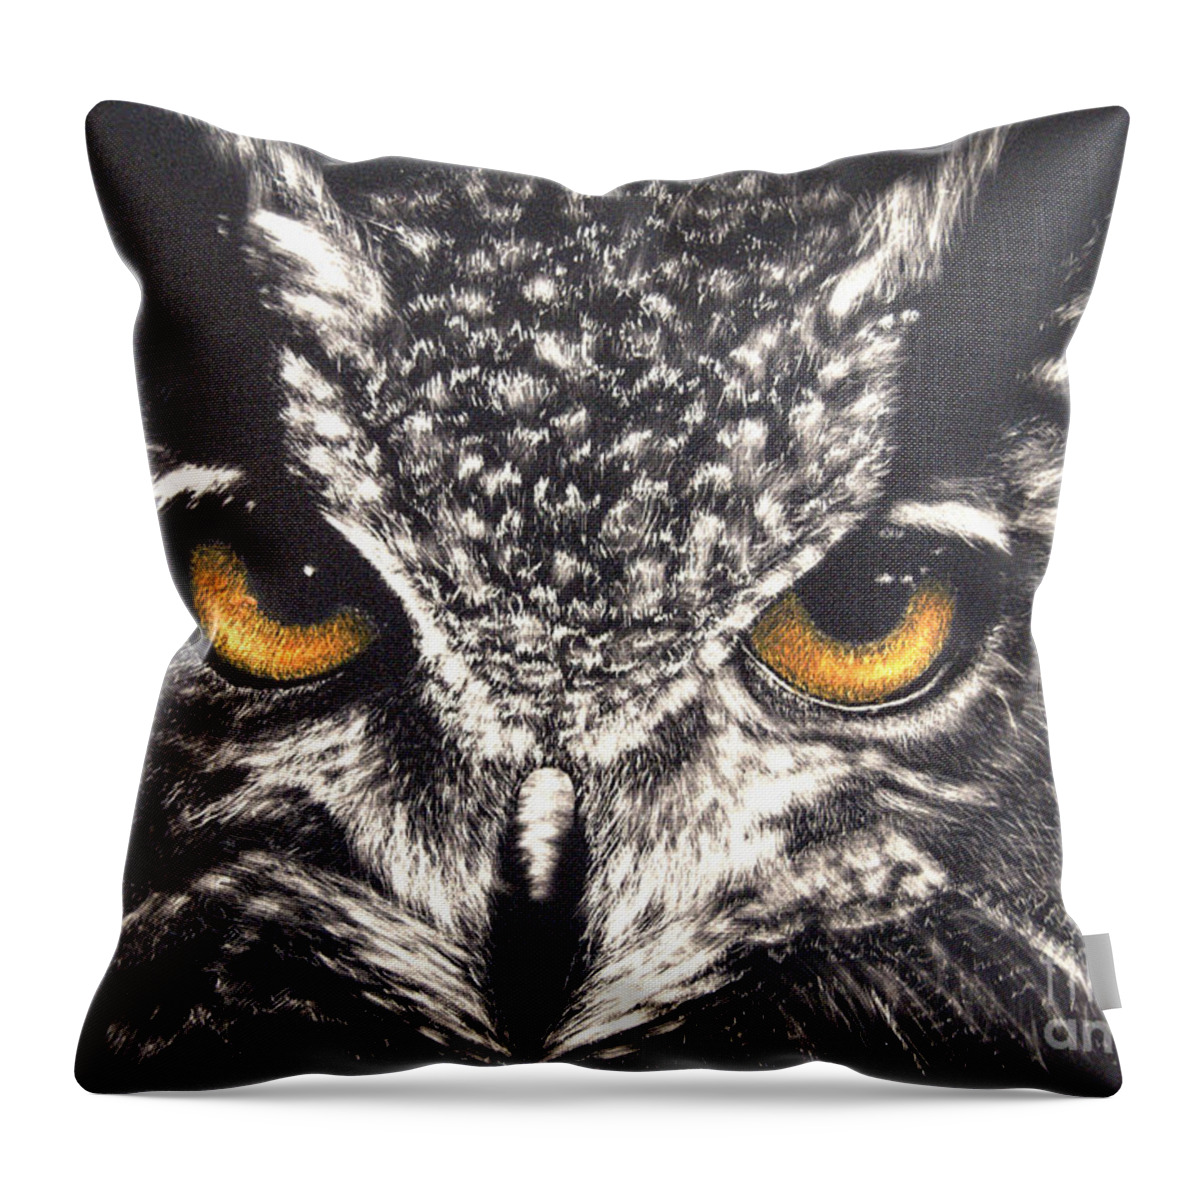 Night Owl Throw Pillow featuring the drawing Night Owl by Lora Duguay